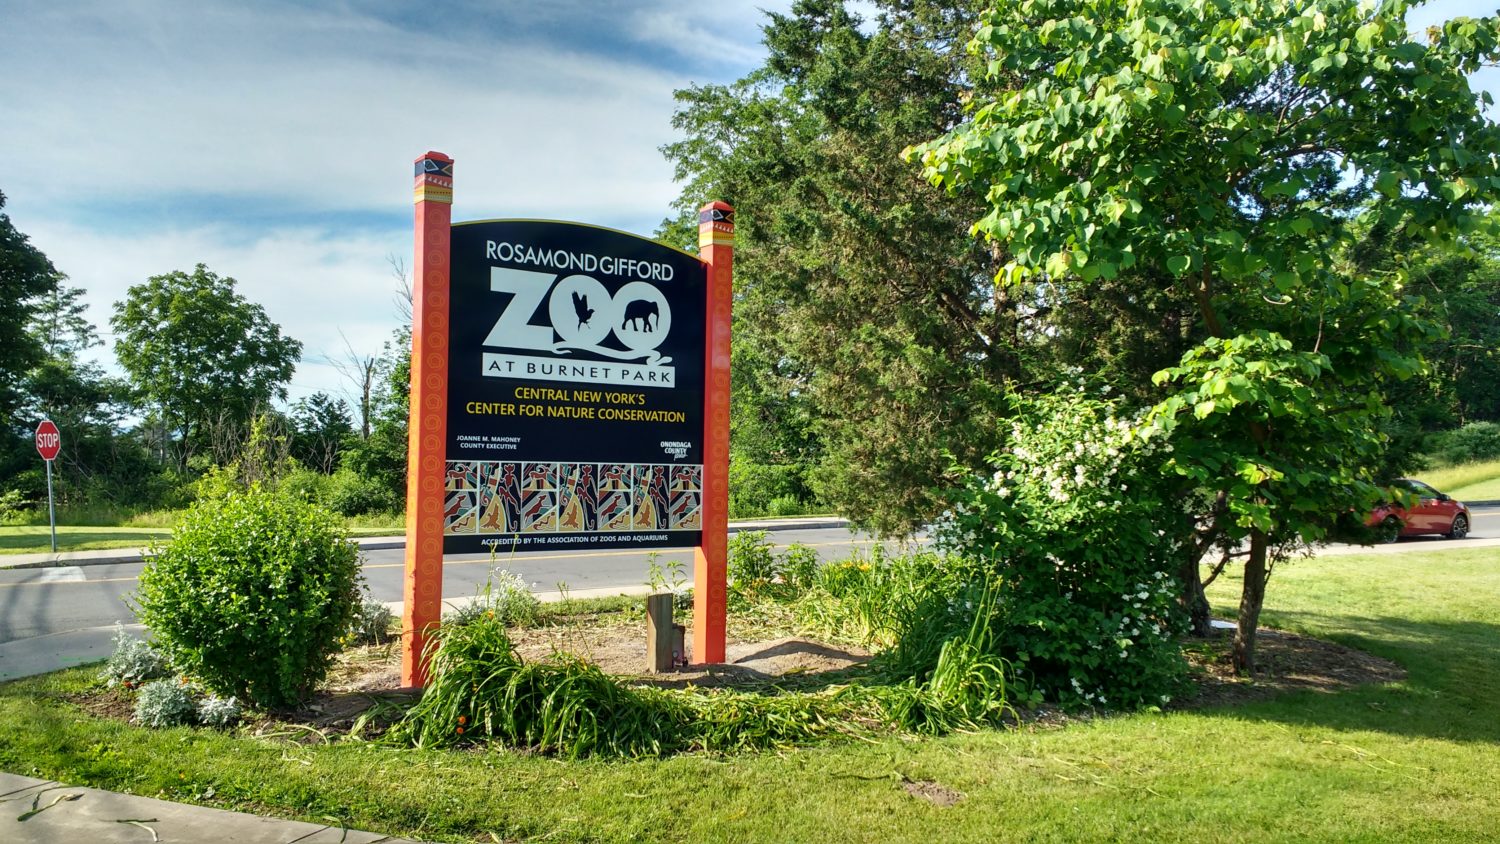 The Rosamond Gifford Zoo sign near one of the entrances to the grounds.